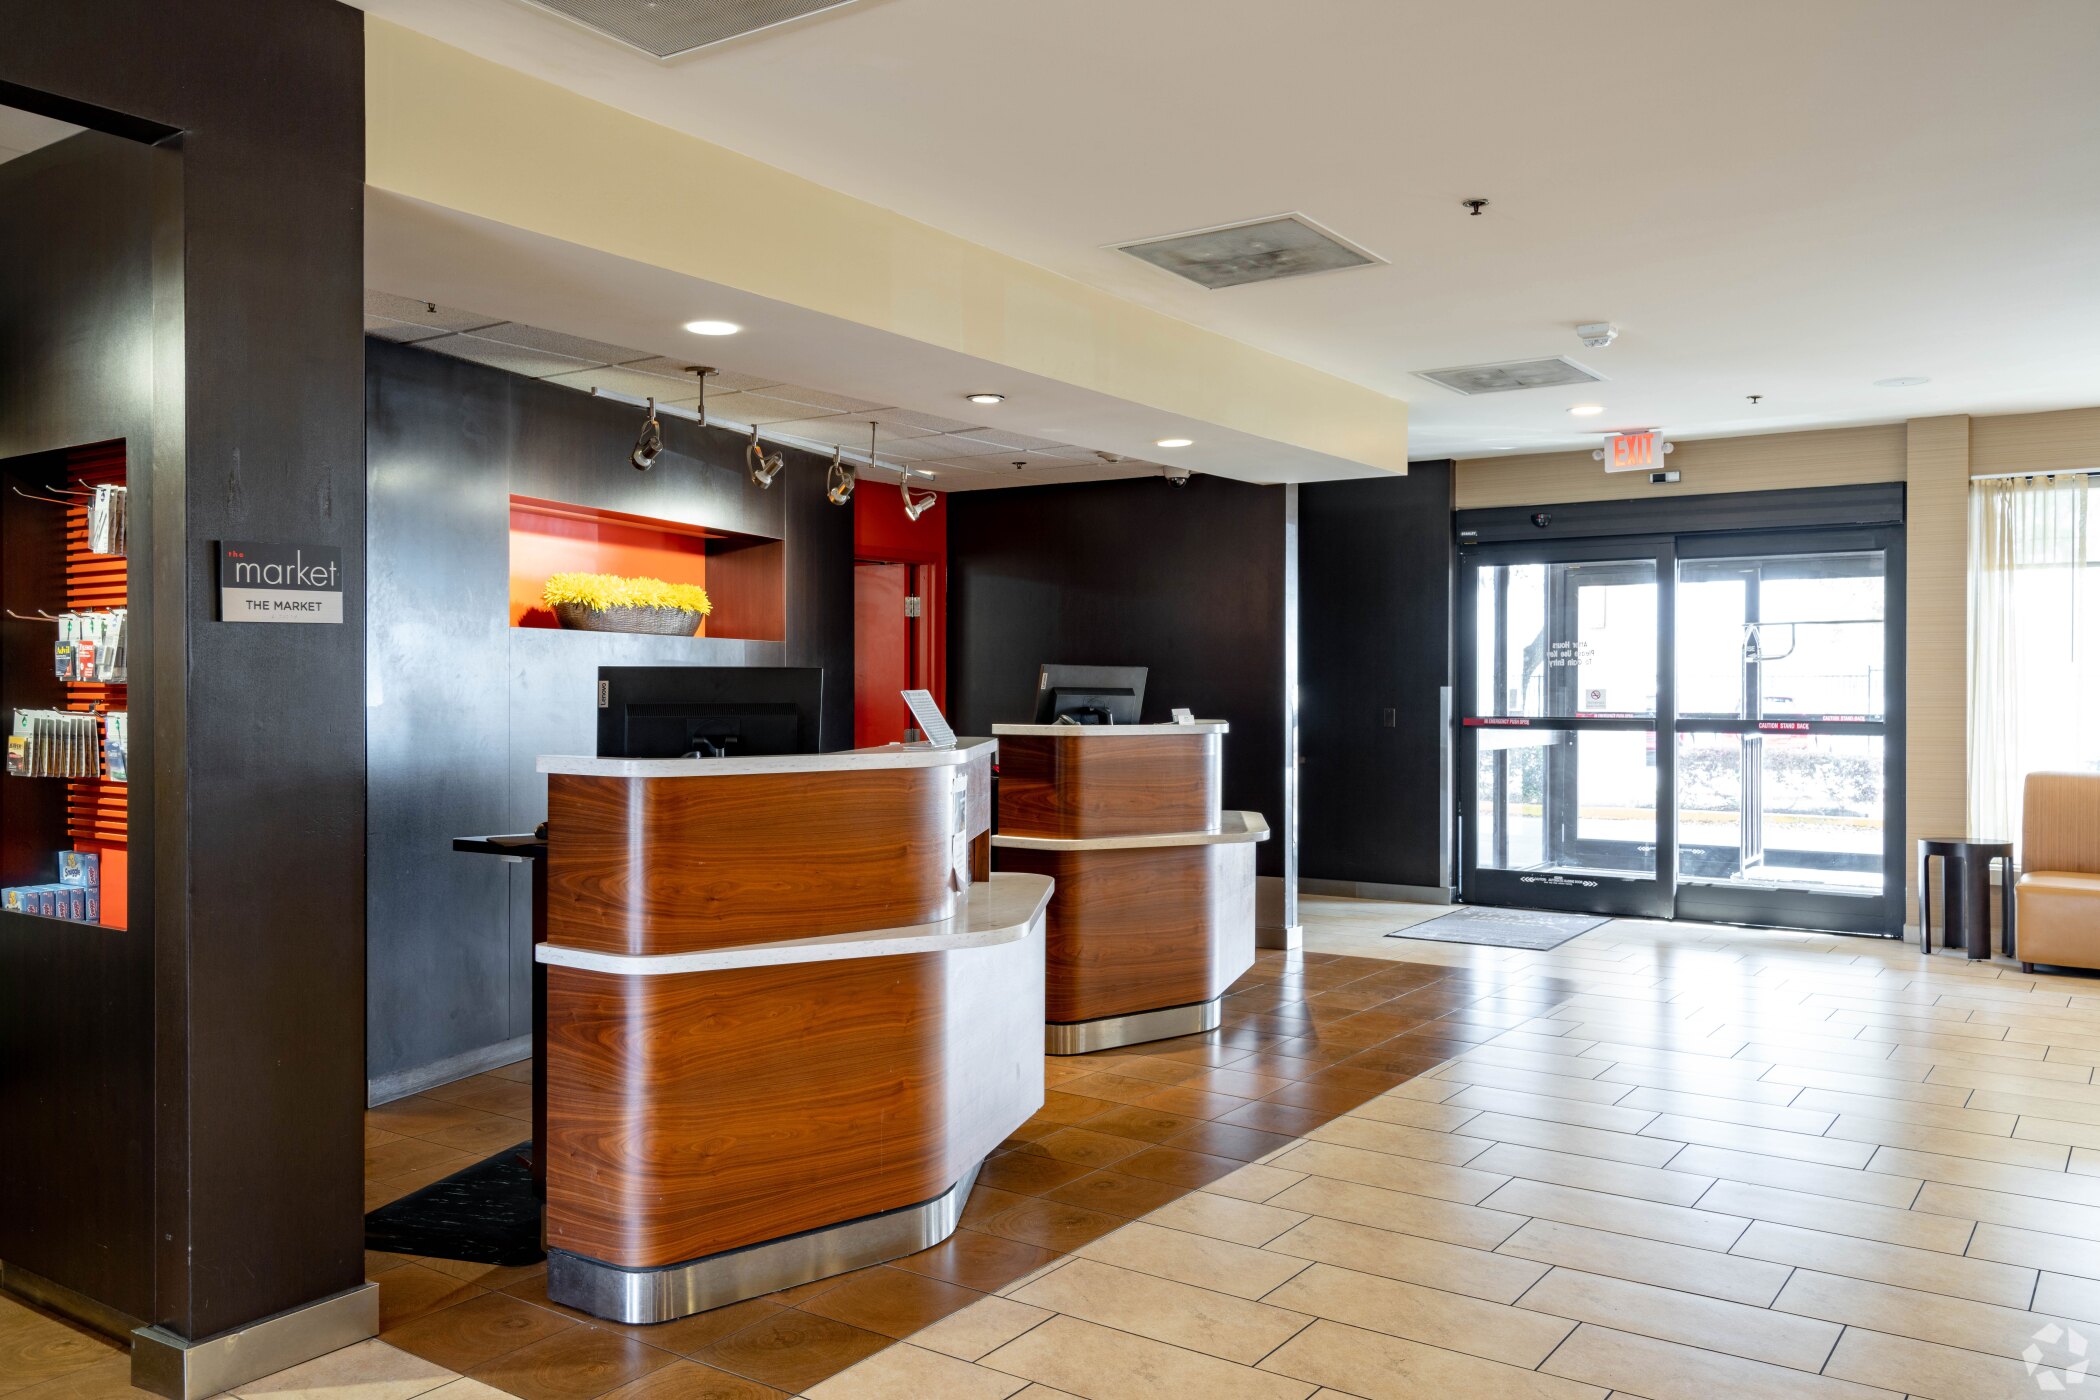 A joint venture of NewcrestImage and Hospitality Capital Partners closed on the acquisition of 16 hotels, including the 153-room Courtyard by Marriott Houston Hobby Airport, for $137.3 million. (CoStar)